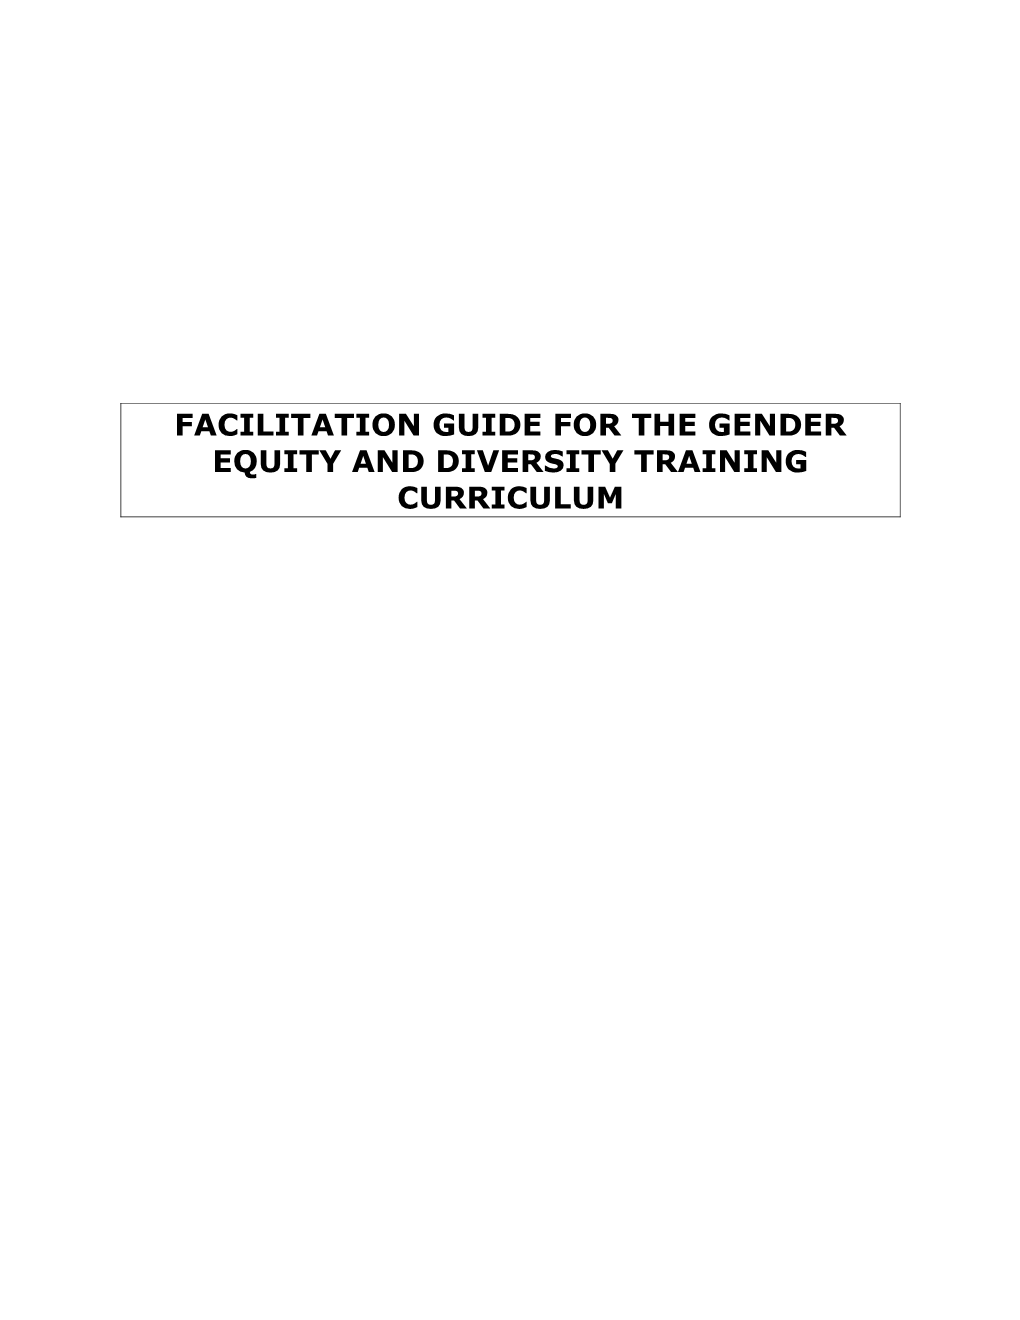 Facilitation Guide for the Gender Equity and Diversity Training Curriculum